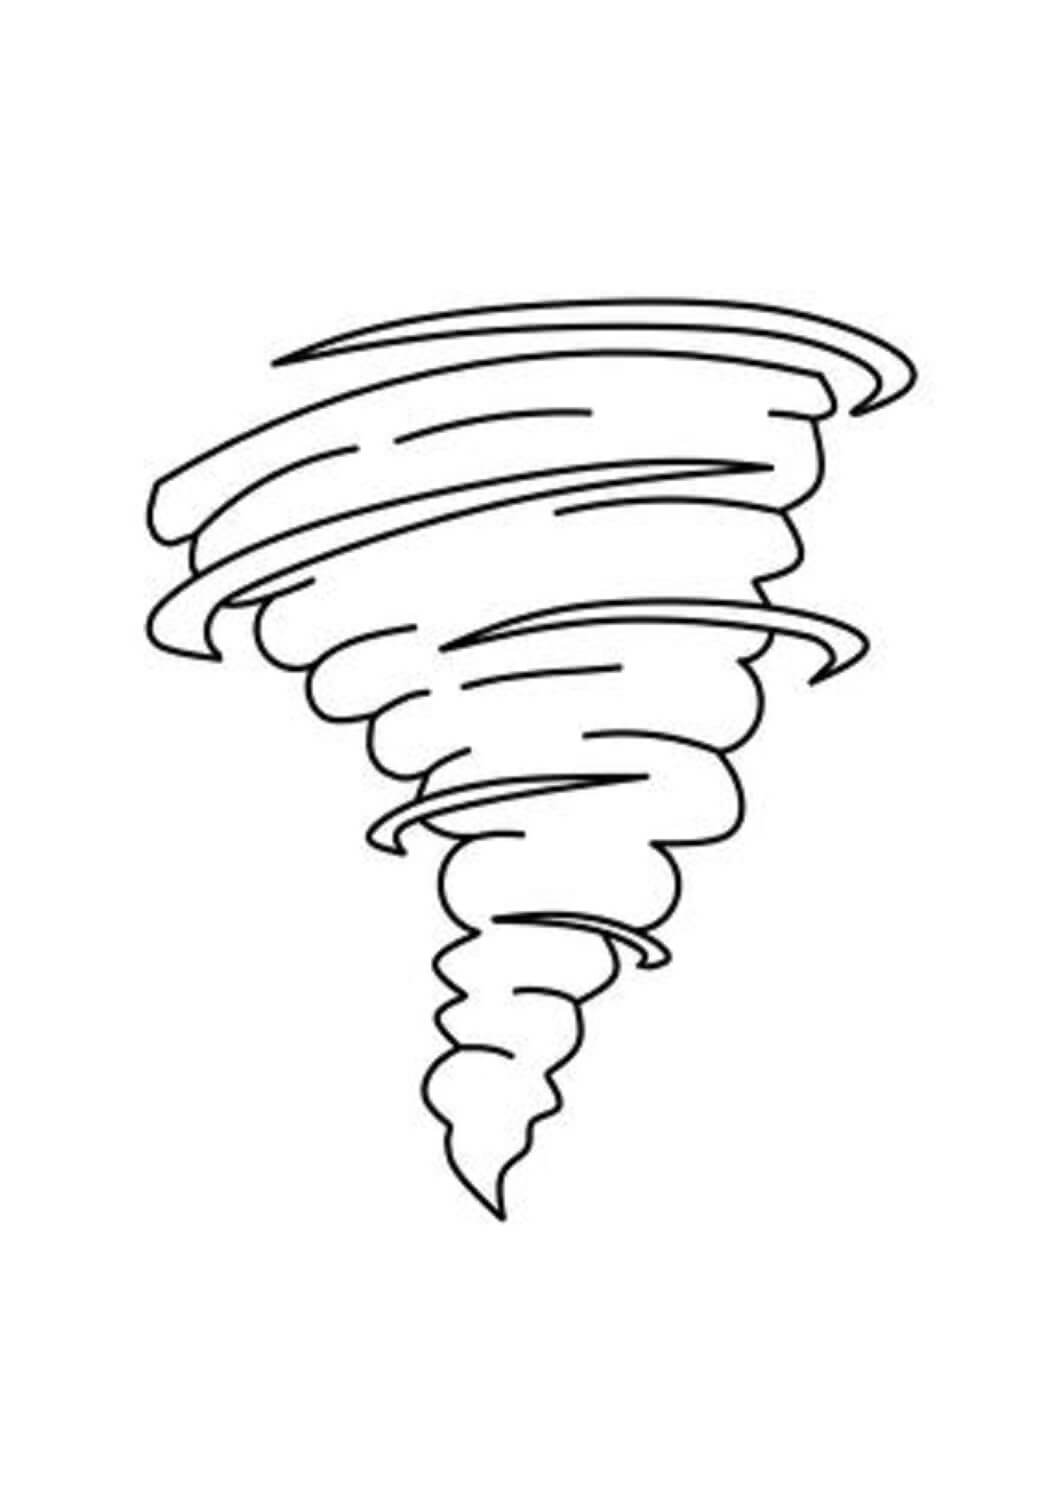 Une Tornade coloring page